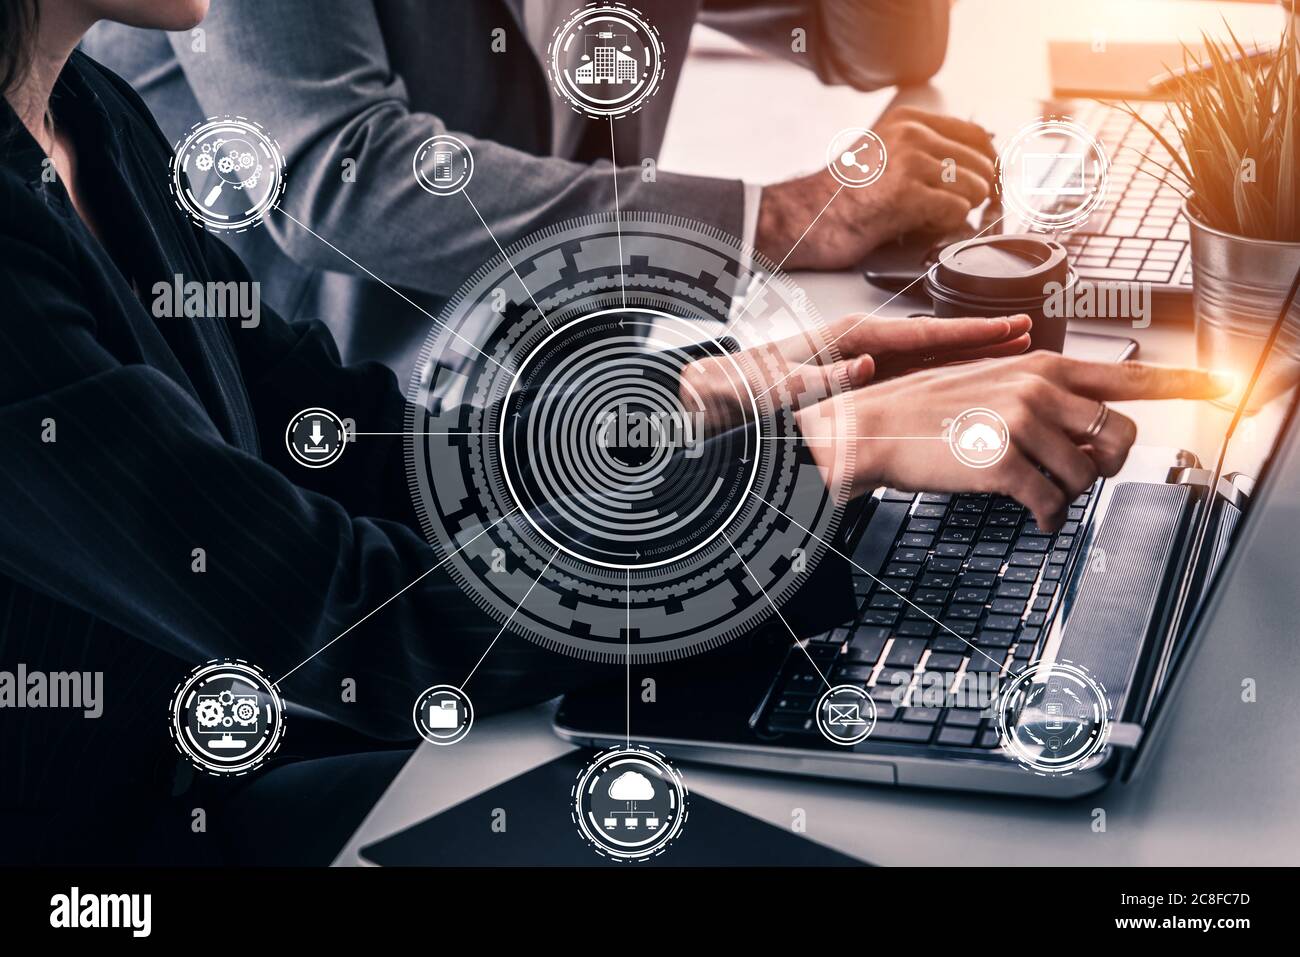 Internet of Things and Communication Technology. Stock Photo